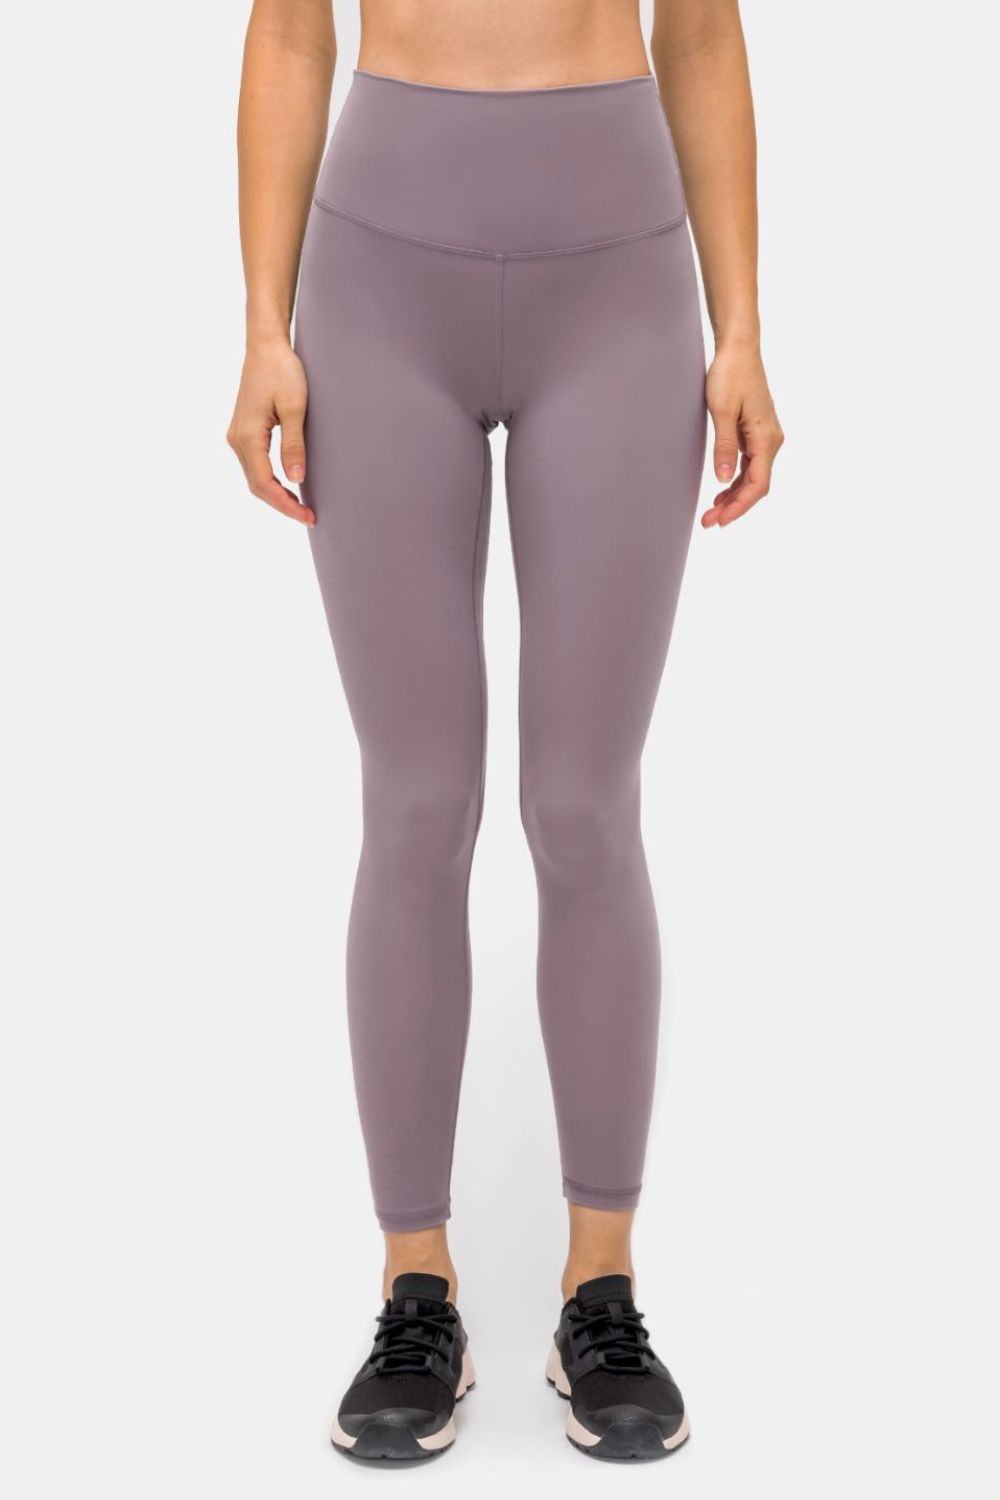 Invisible Pocket Yoga Leggings - Personal Hour for Yoga and Meditations 